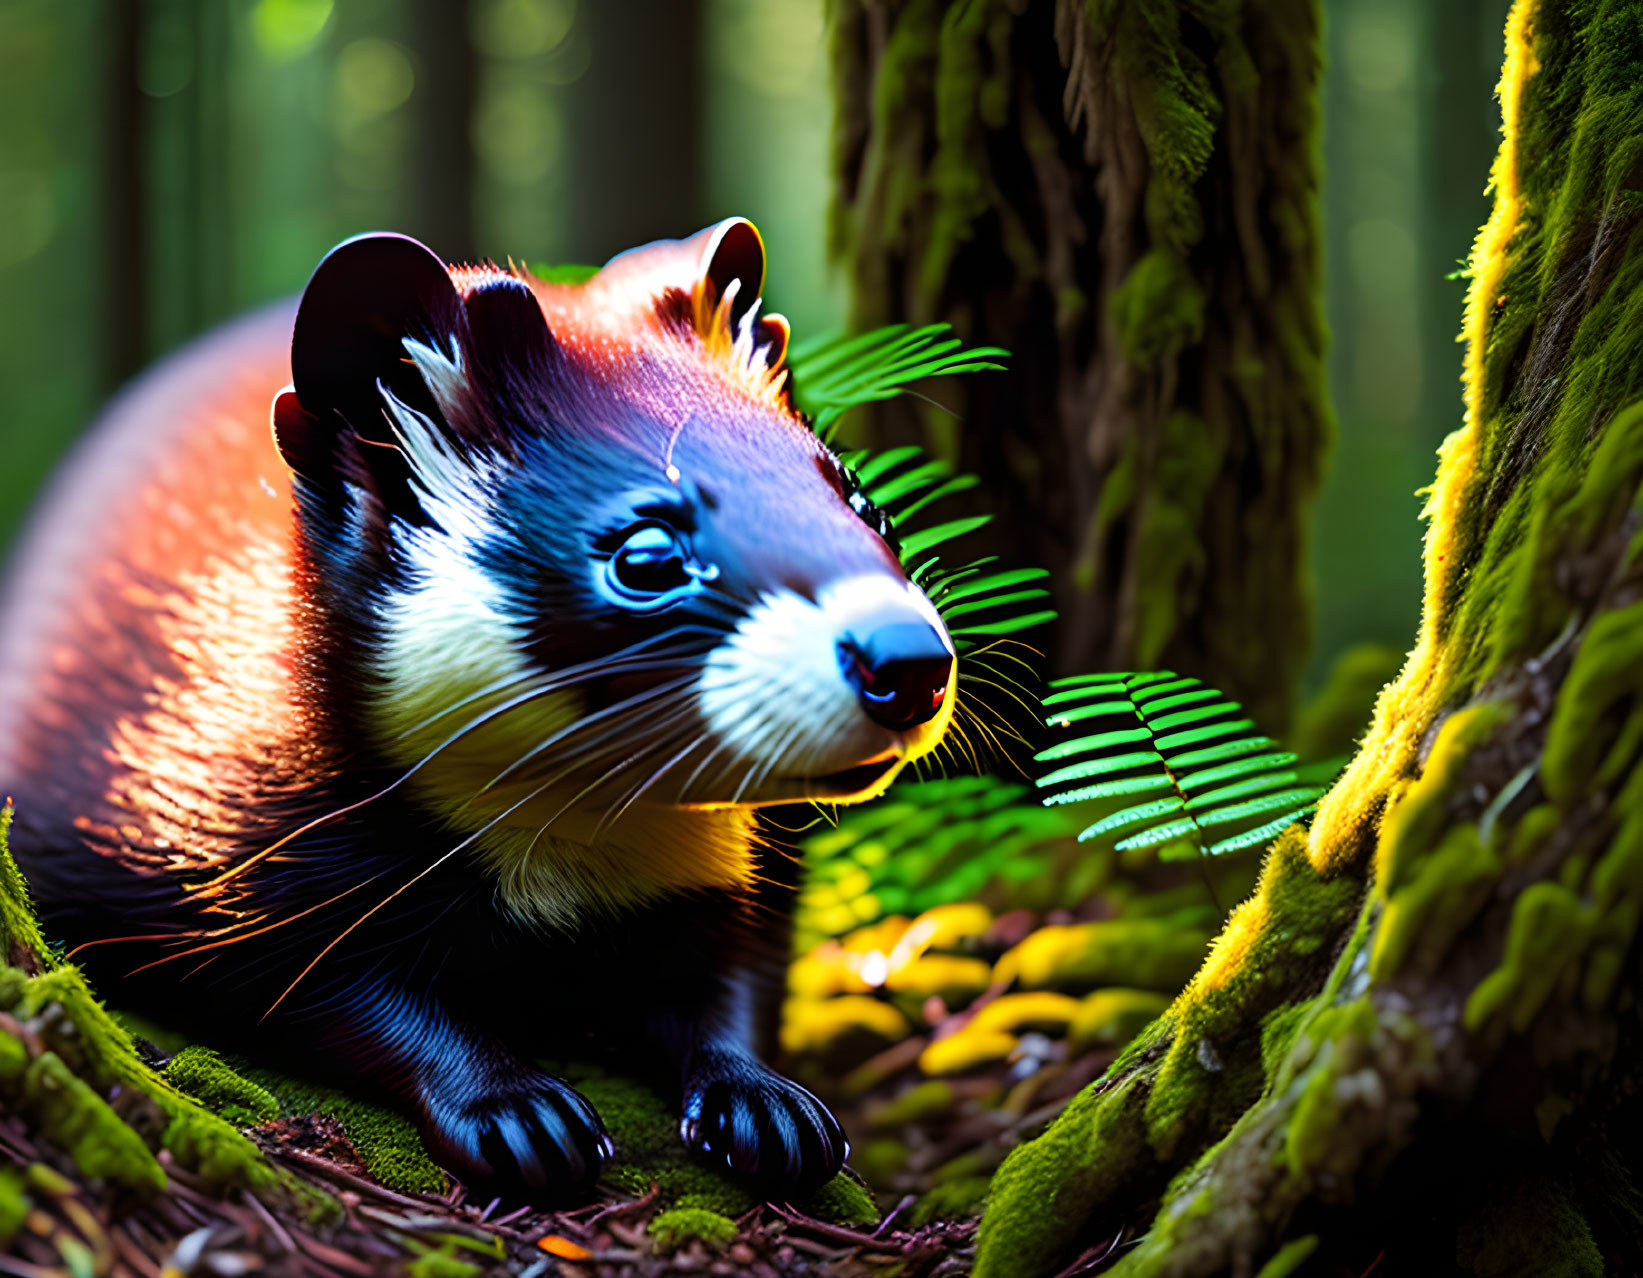 Illustrated colorful badger-like creature in lush forest with green ferns and sunlight.